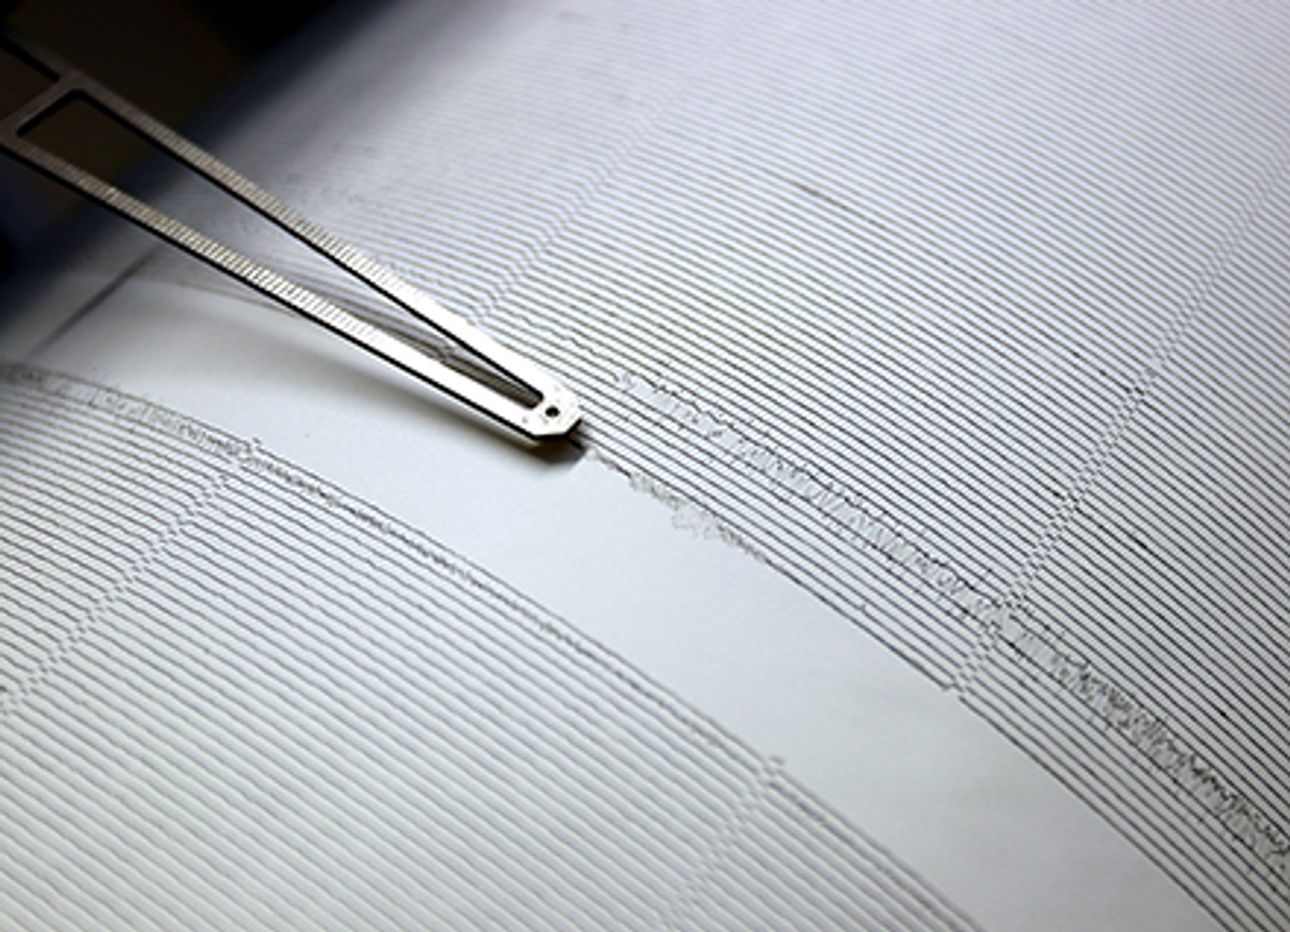 A seismograph needle drawing a black line across white paper.